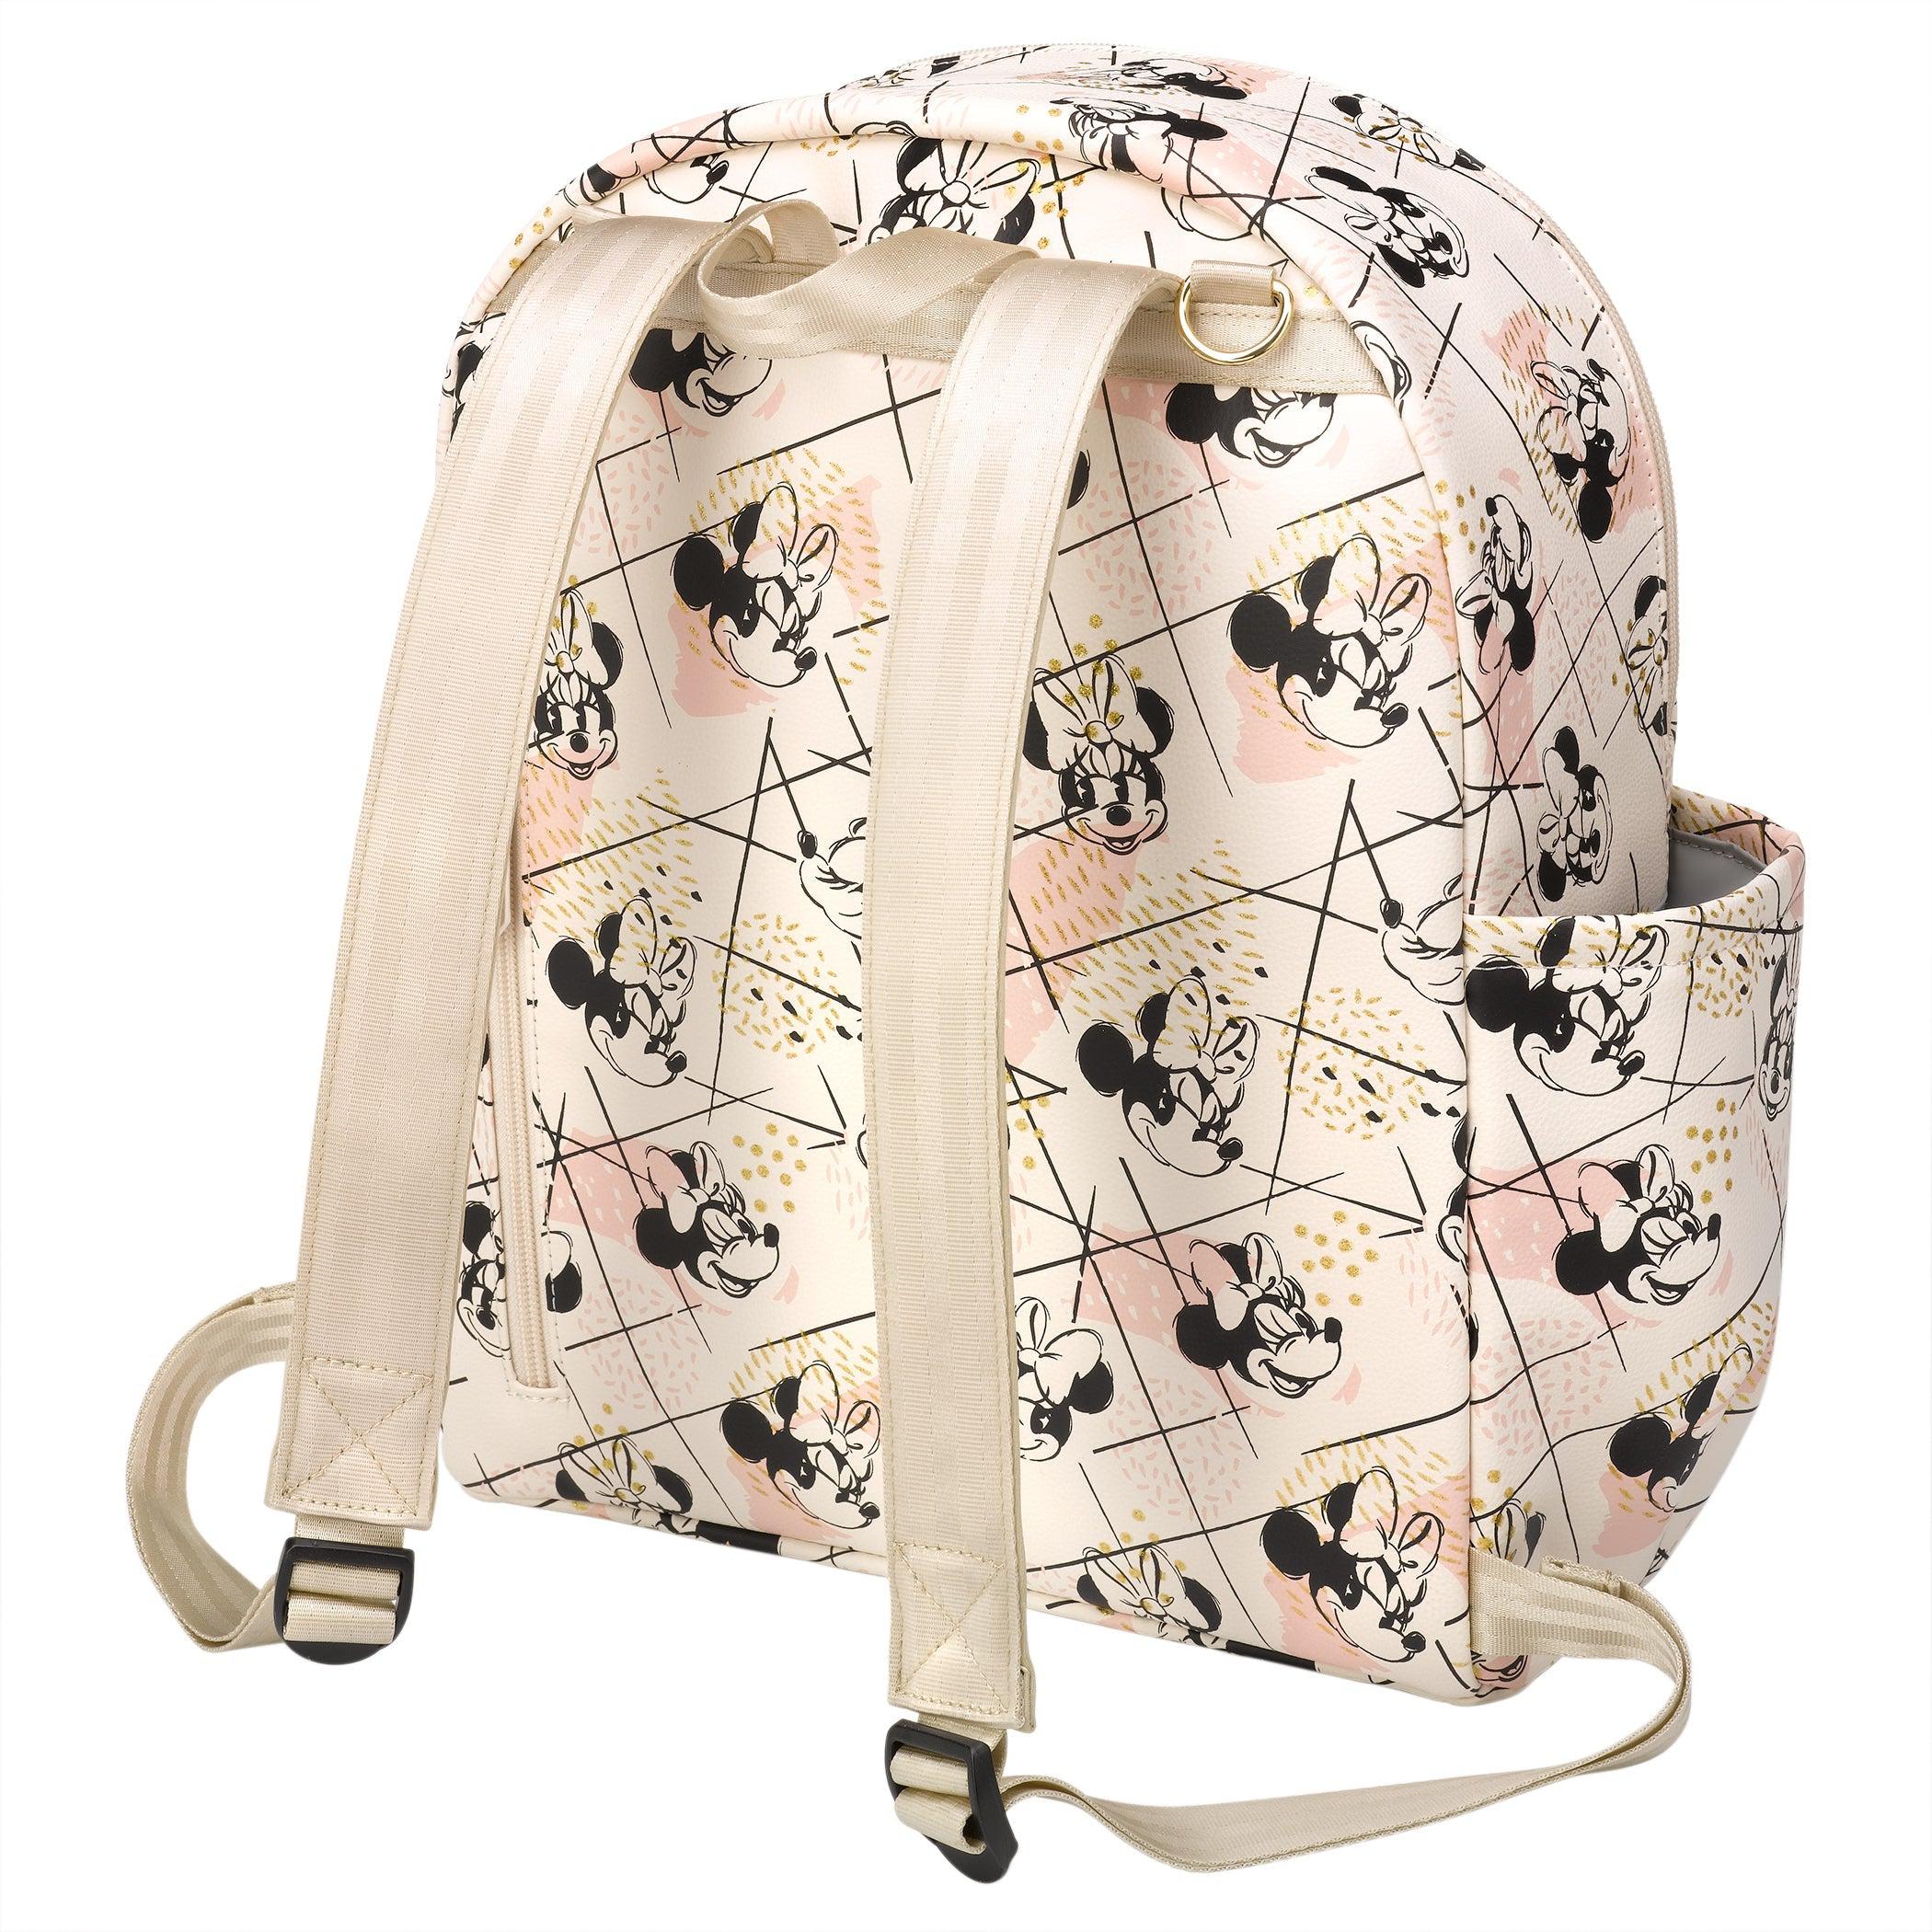 Petunia Pickle Bottom Ace Diaper Backpack in Shimmery Minnie Mouse